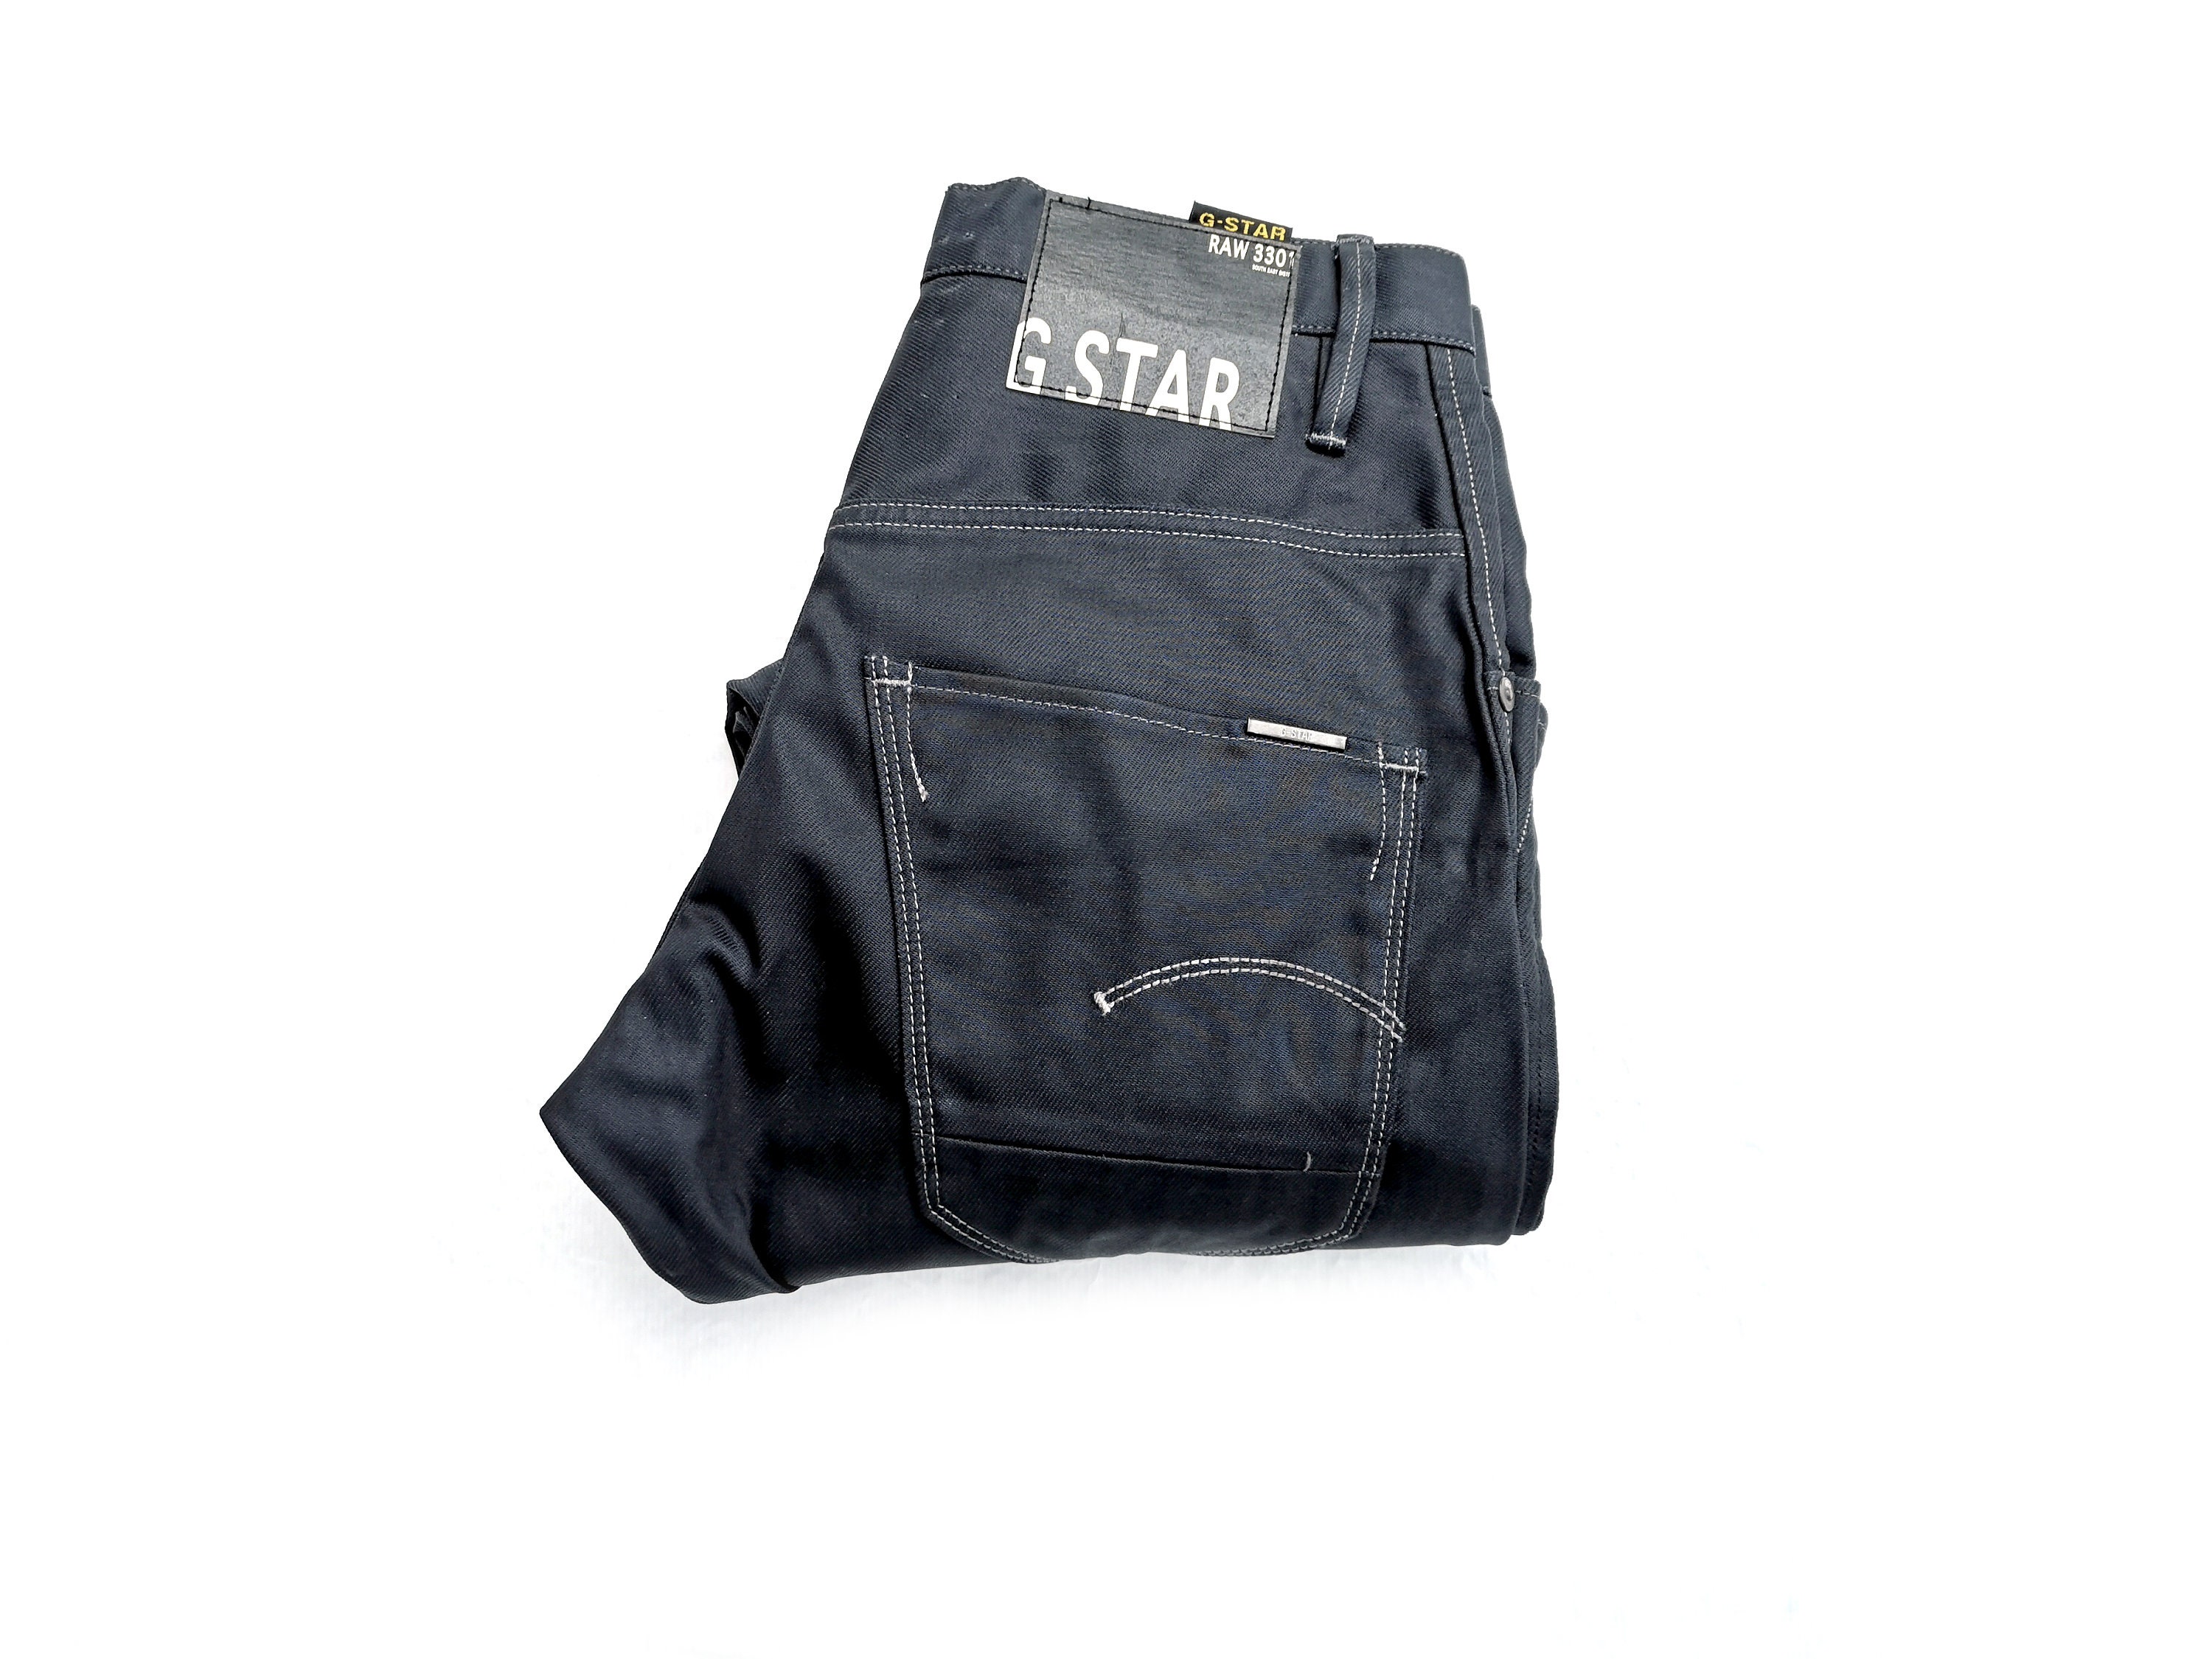 G-Star Raw Tomorrow's Classics Fall 2019 Campaign  Denim shirt with jeans,  Men's denim style, Jeans street style